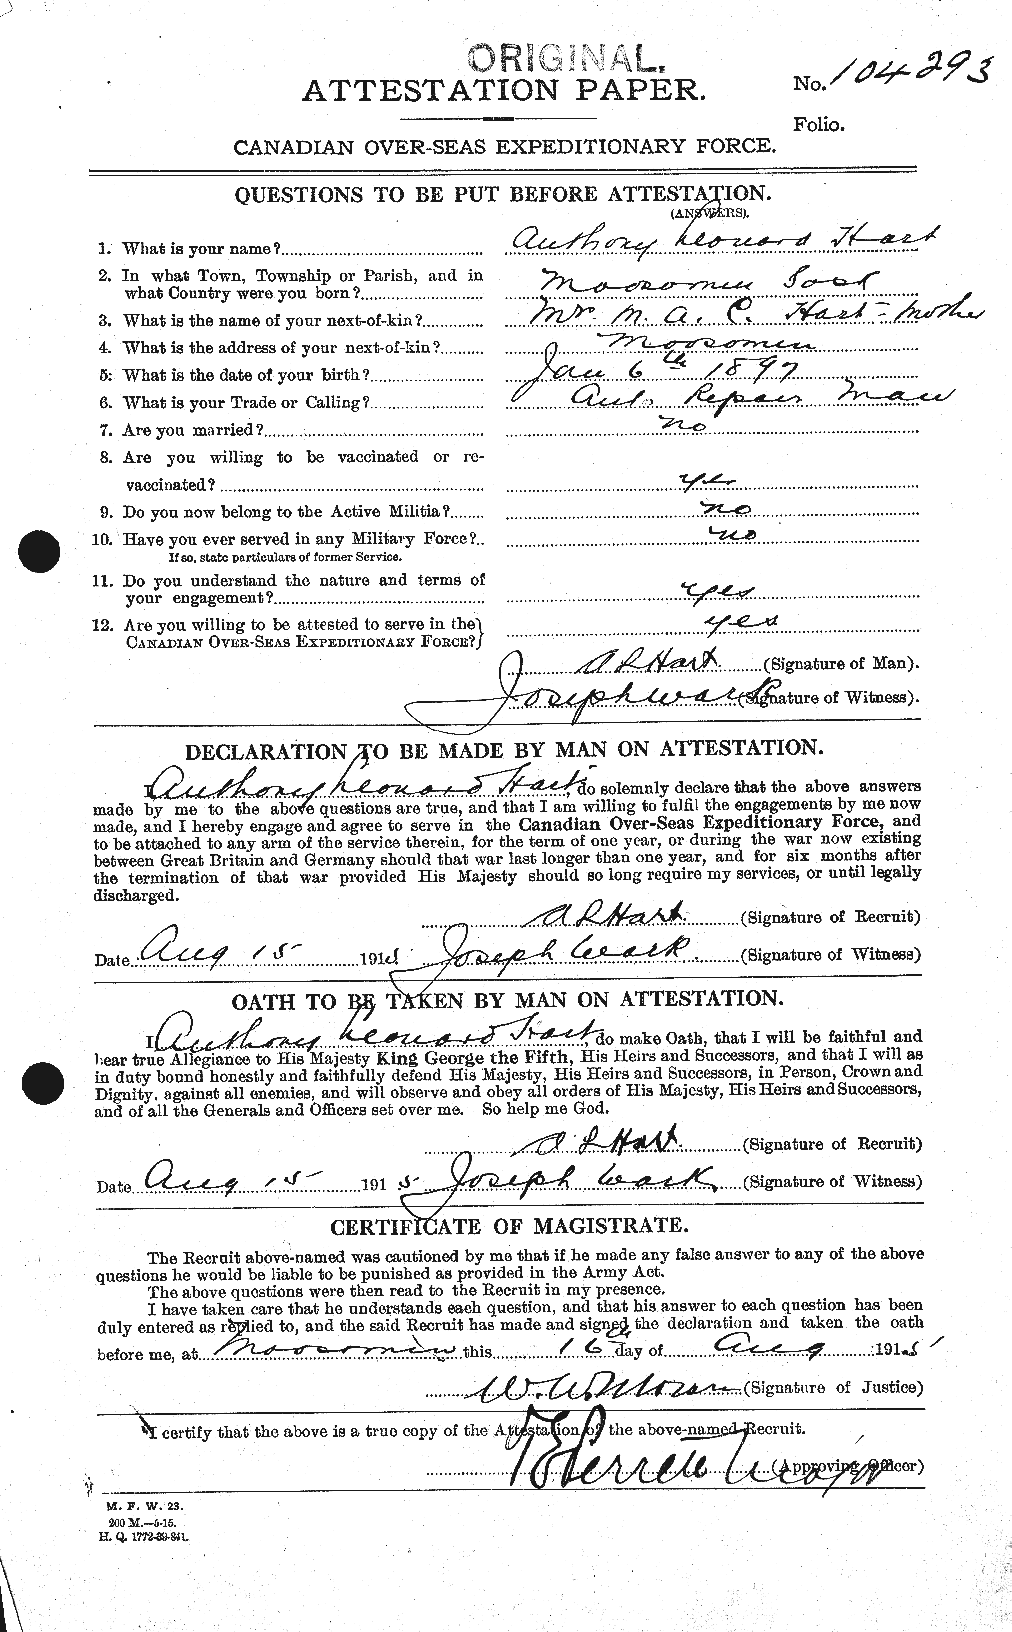 Personnel Records of the First World War - CEF 381814a